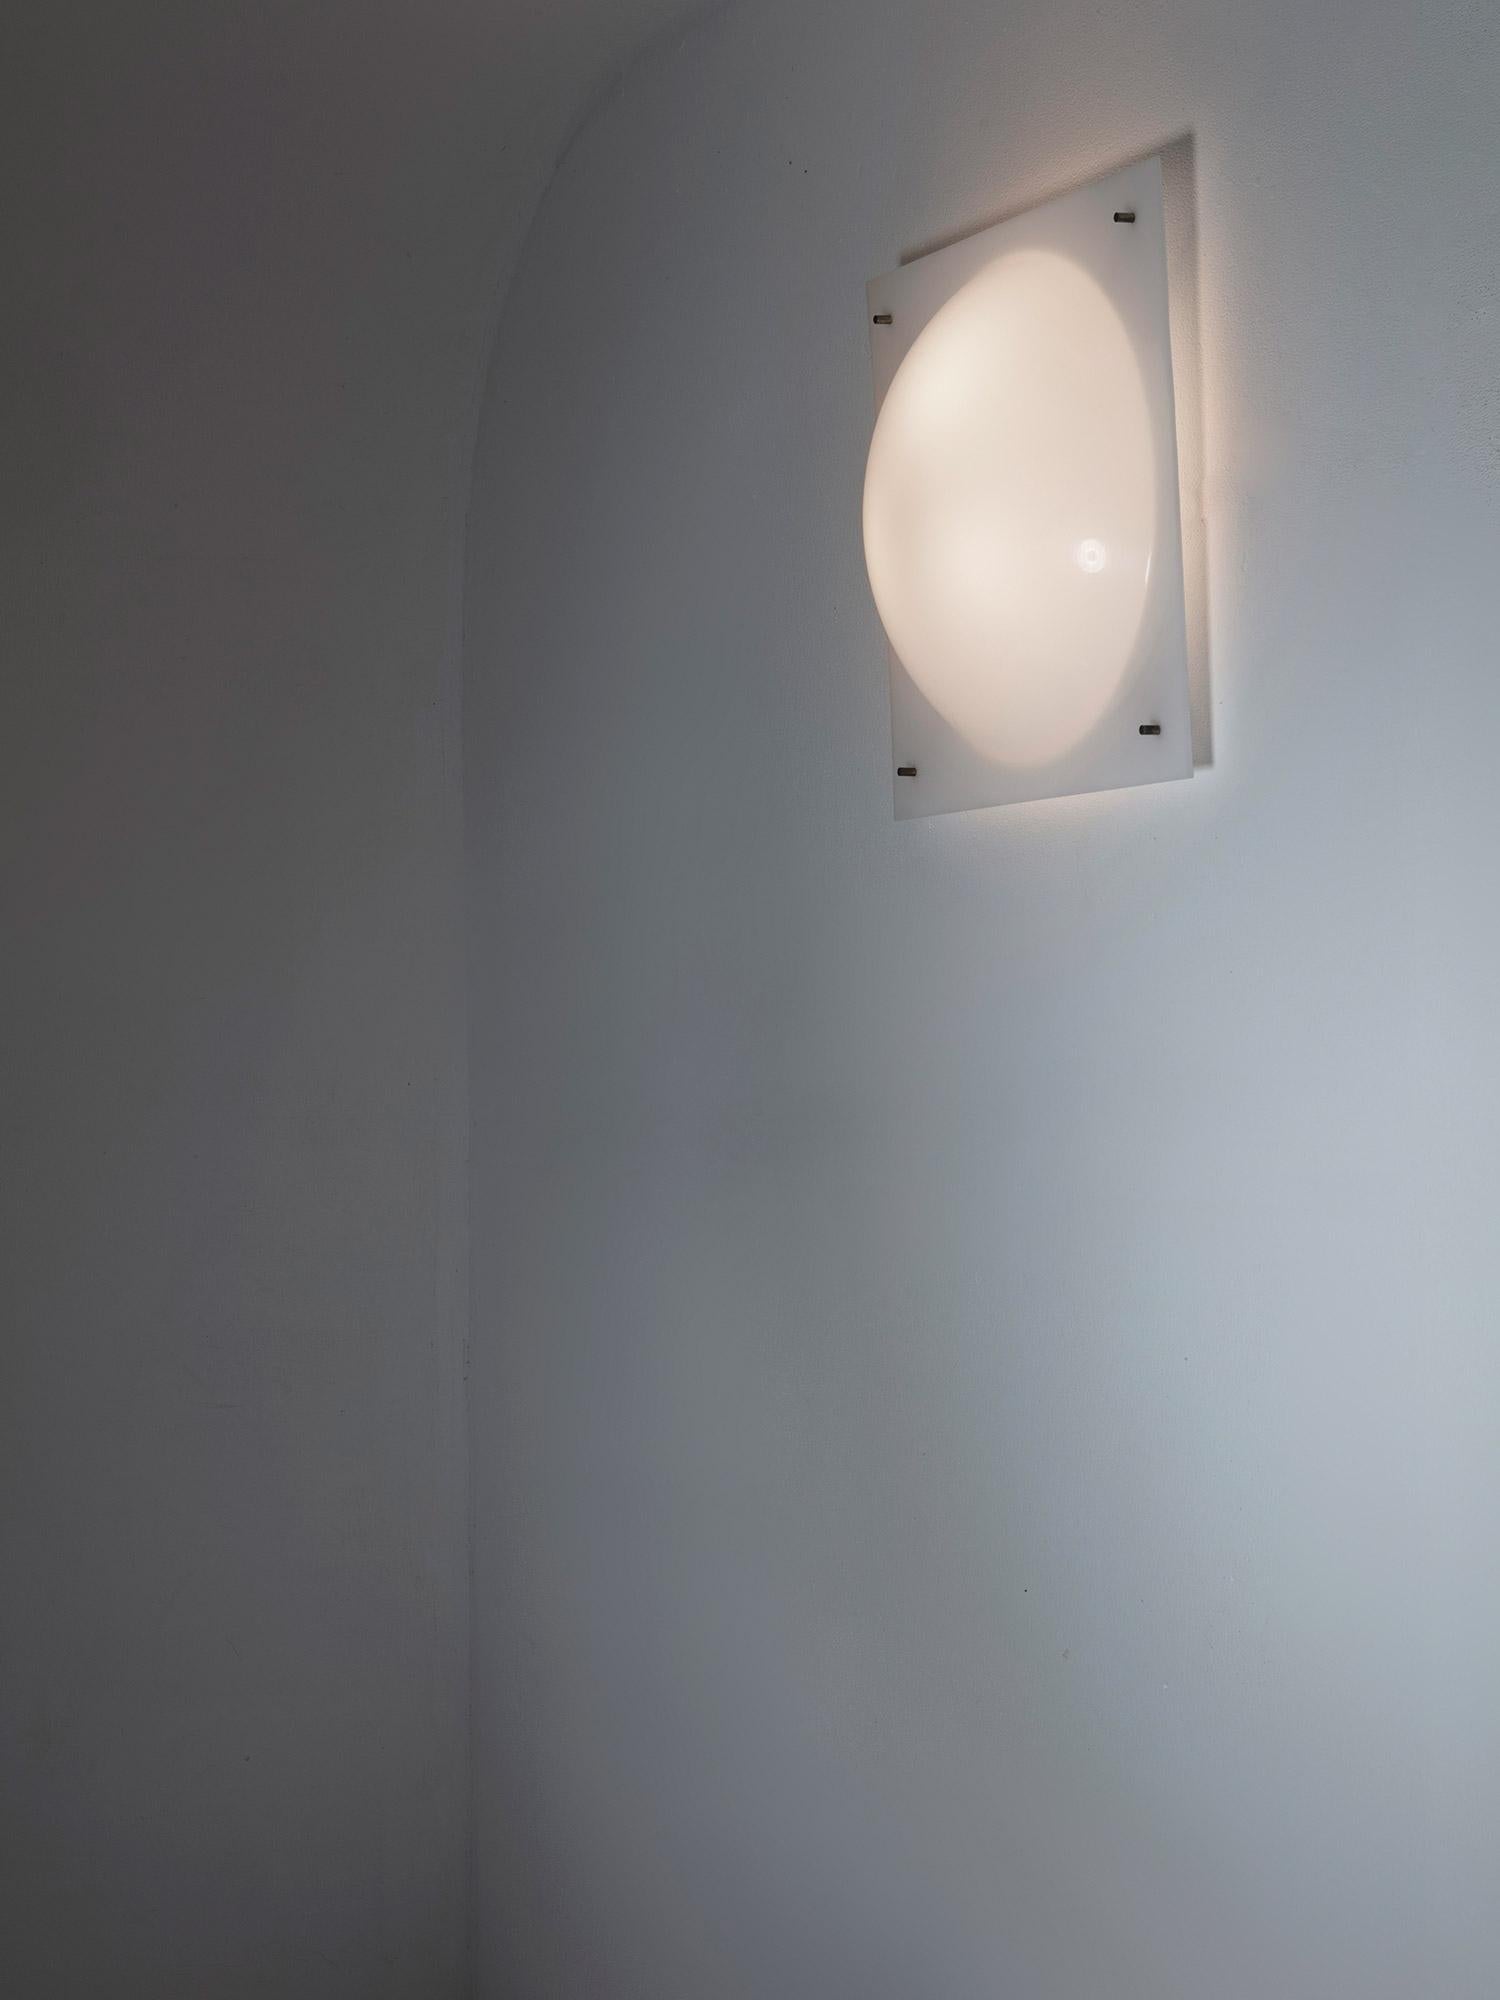 Wall lamp model 199b by Giuseppe Ostuni for O-Luce.
White perspex supported by a thin brass frame.
Literature available upon request.
Three pieces available.